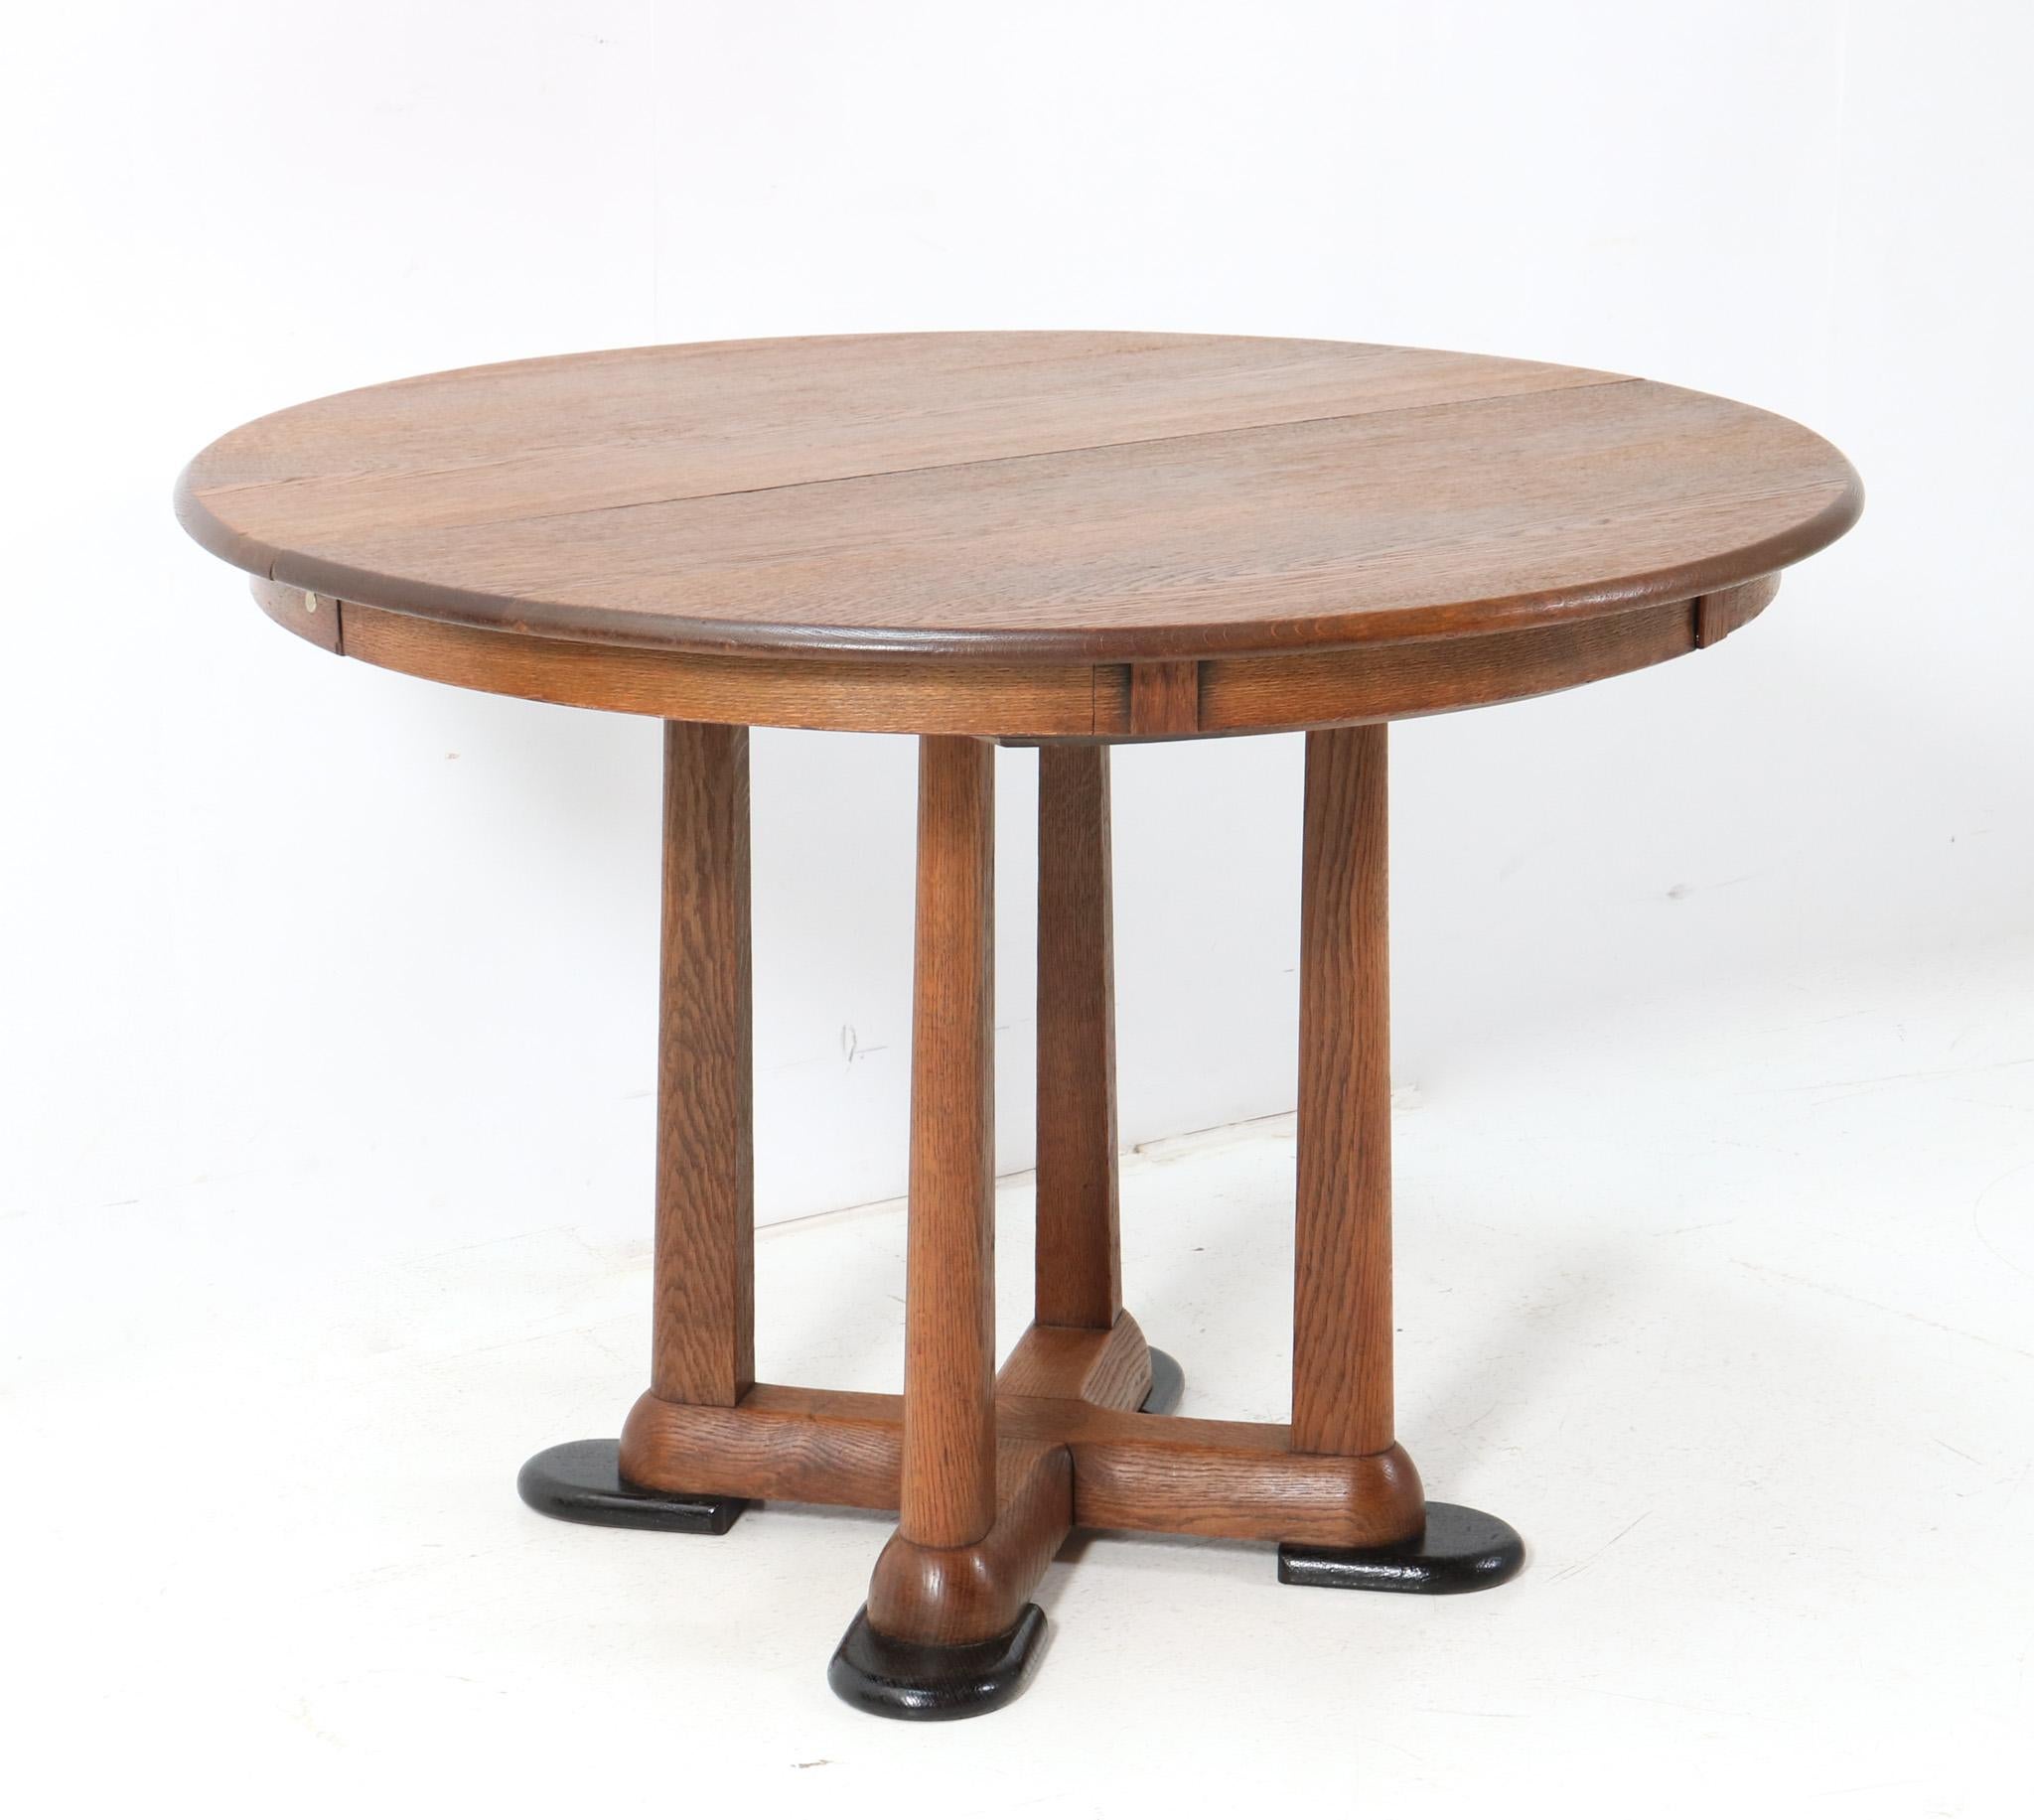 Magnificent and ultra rare Art Deco  Amsterdamse School extendable dining room table.
Design by A.F. van der Weij for L.O.V. Oosterbeek.
Striking Dutch design from the 1920s.
Solid oak base with black lacquered feet.
The round top can be transformed